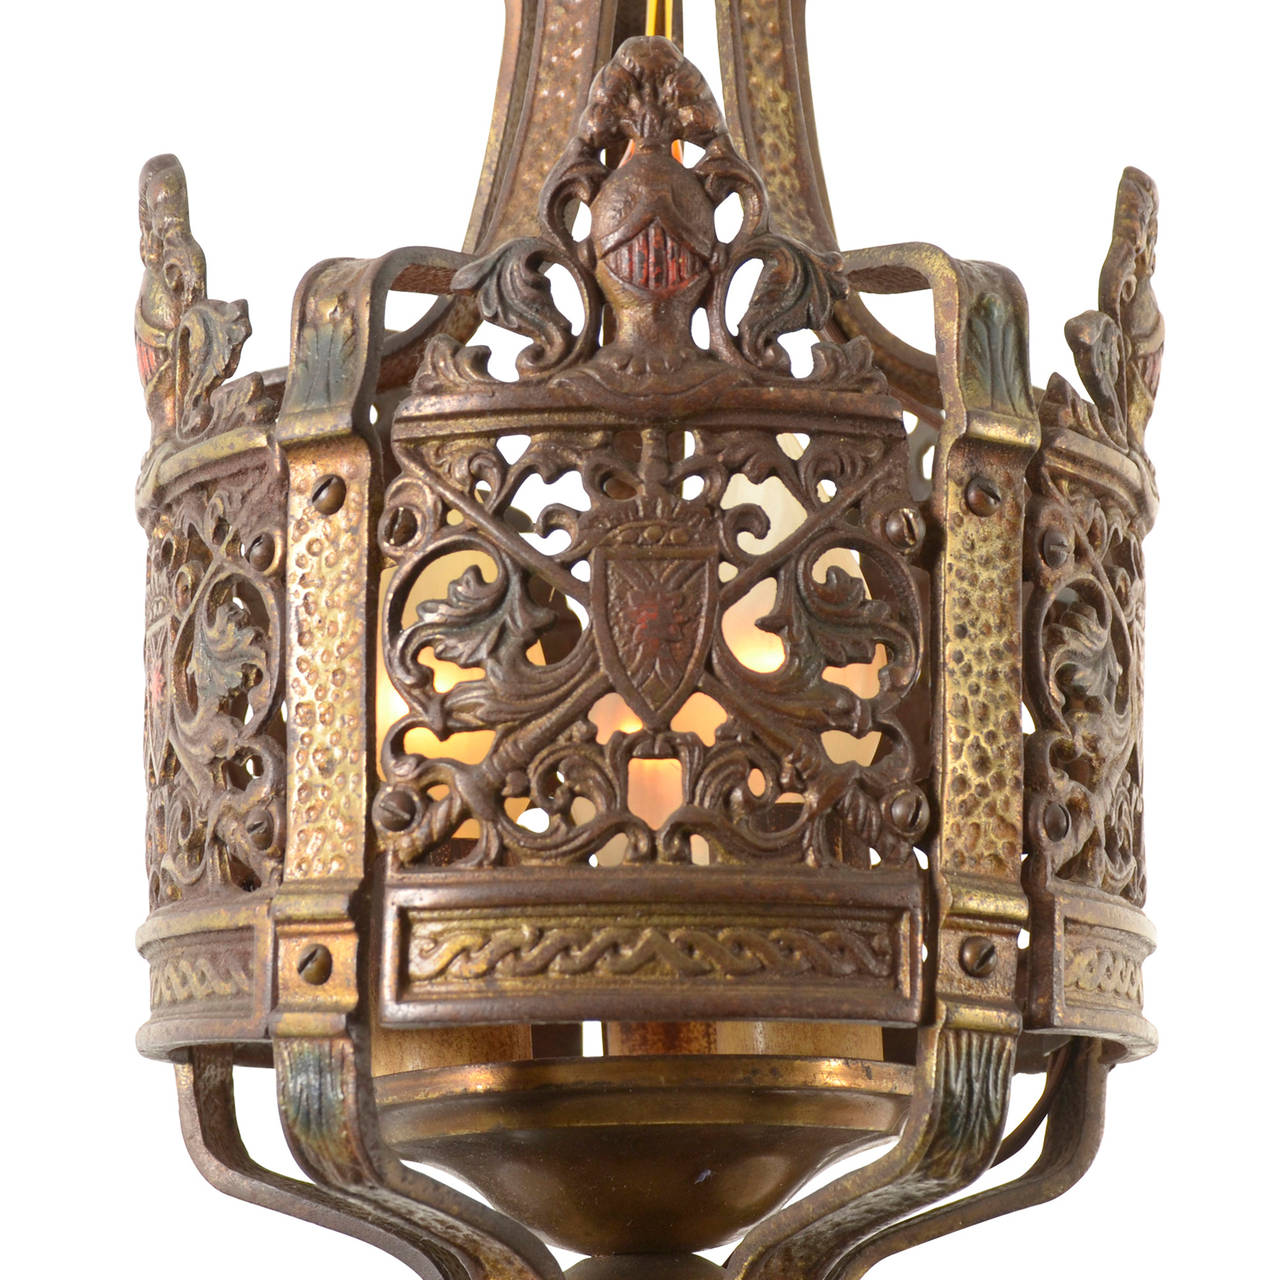 Revival Ornate Heraldic Wrought Fixture with Knight Motif, circa 1925